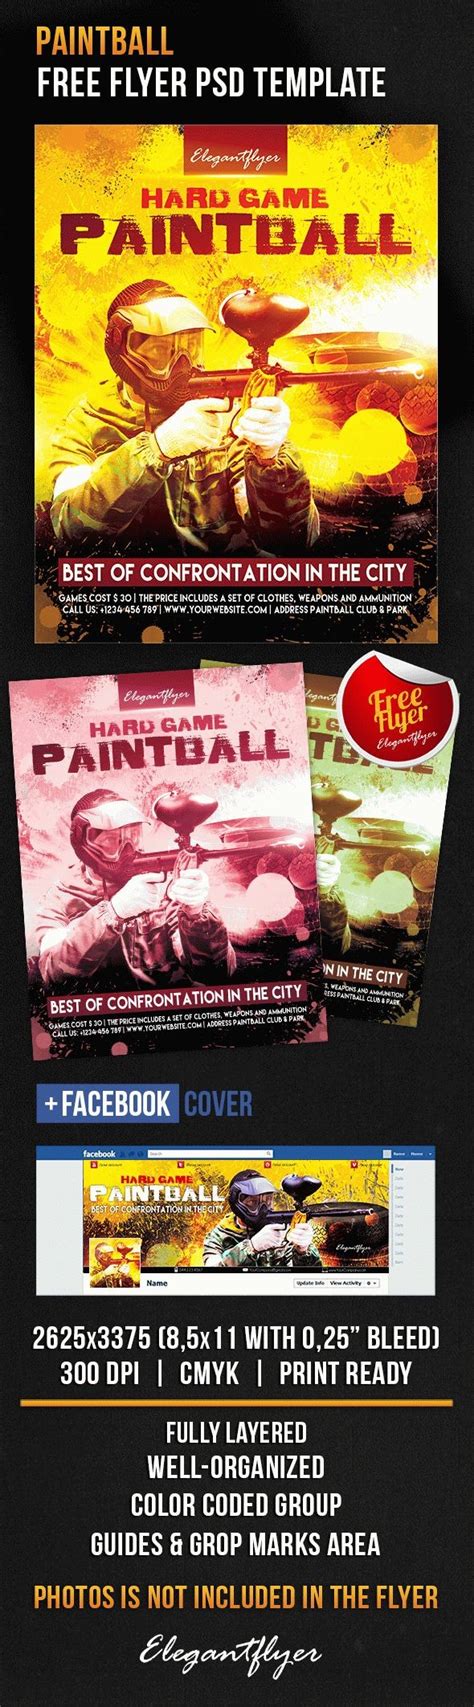 Yellow Simple Paintball Free Flyer Template Psd By Elegantflyer